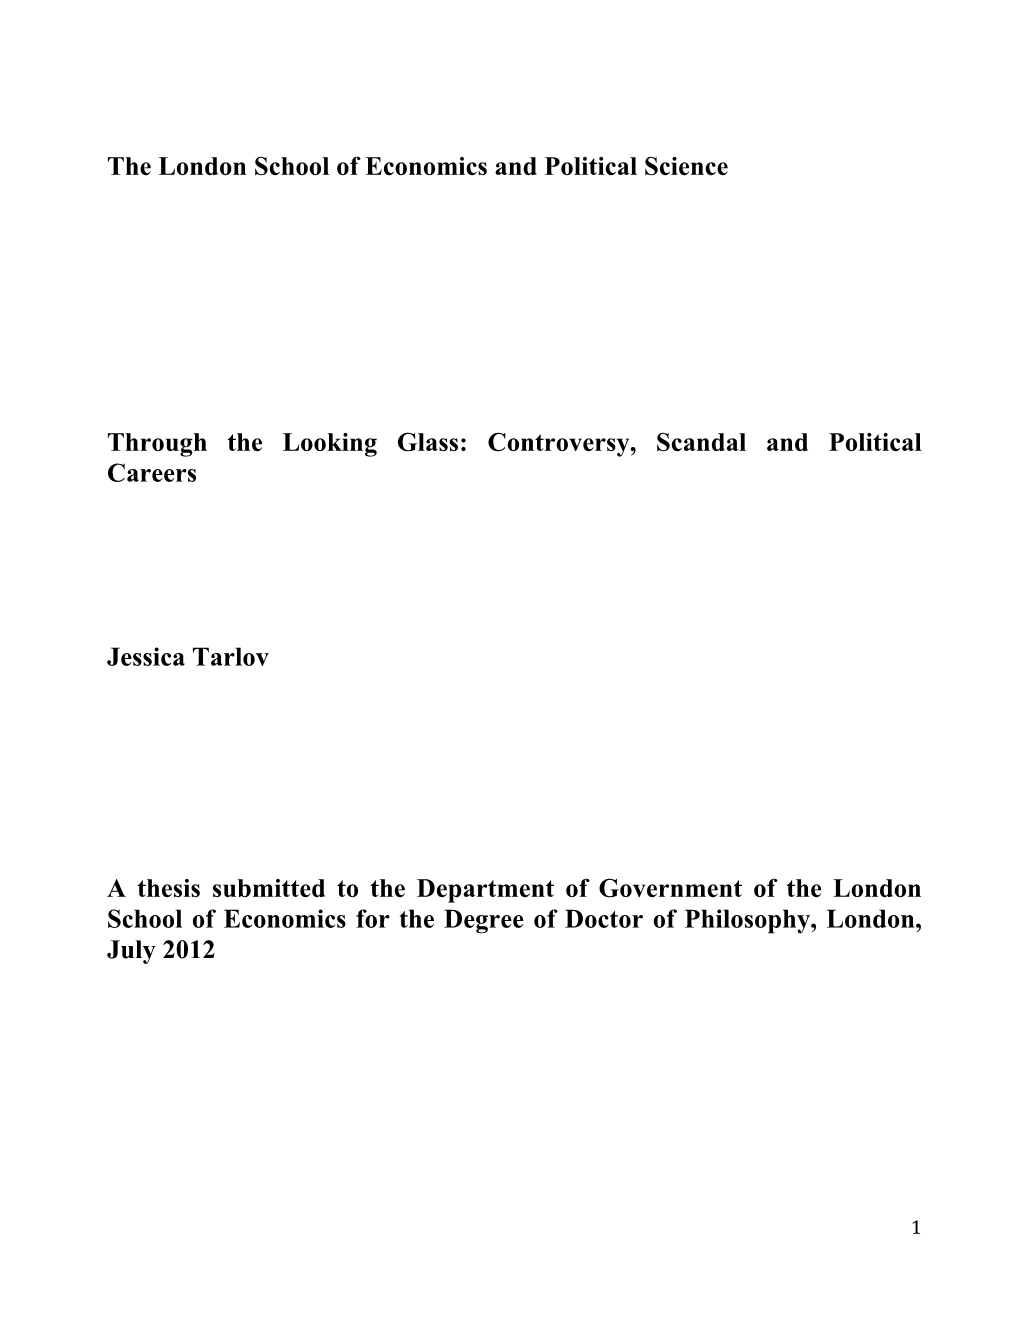 The London School of Economics and Political Science Through The